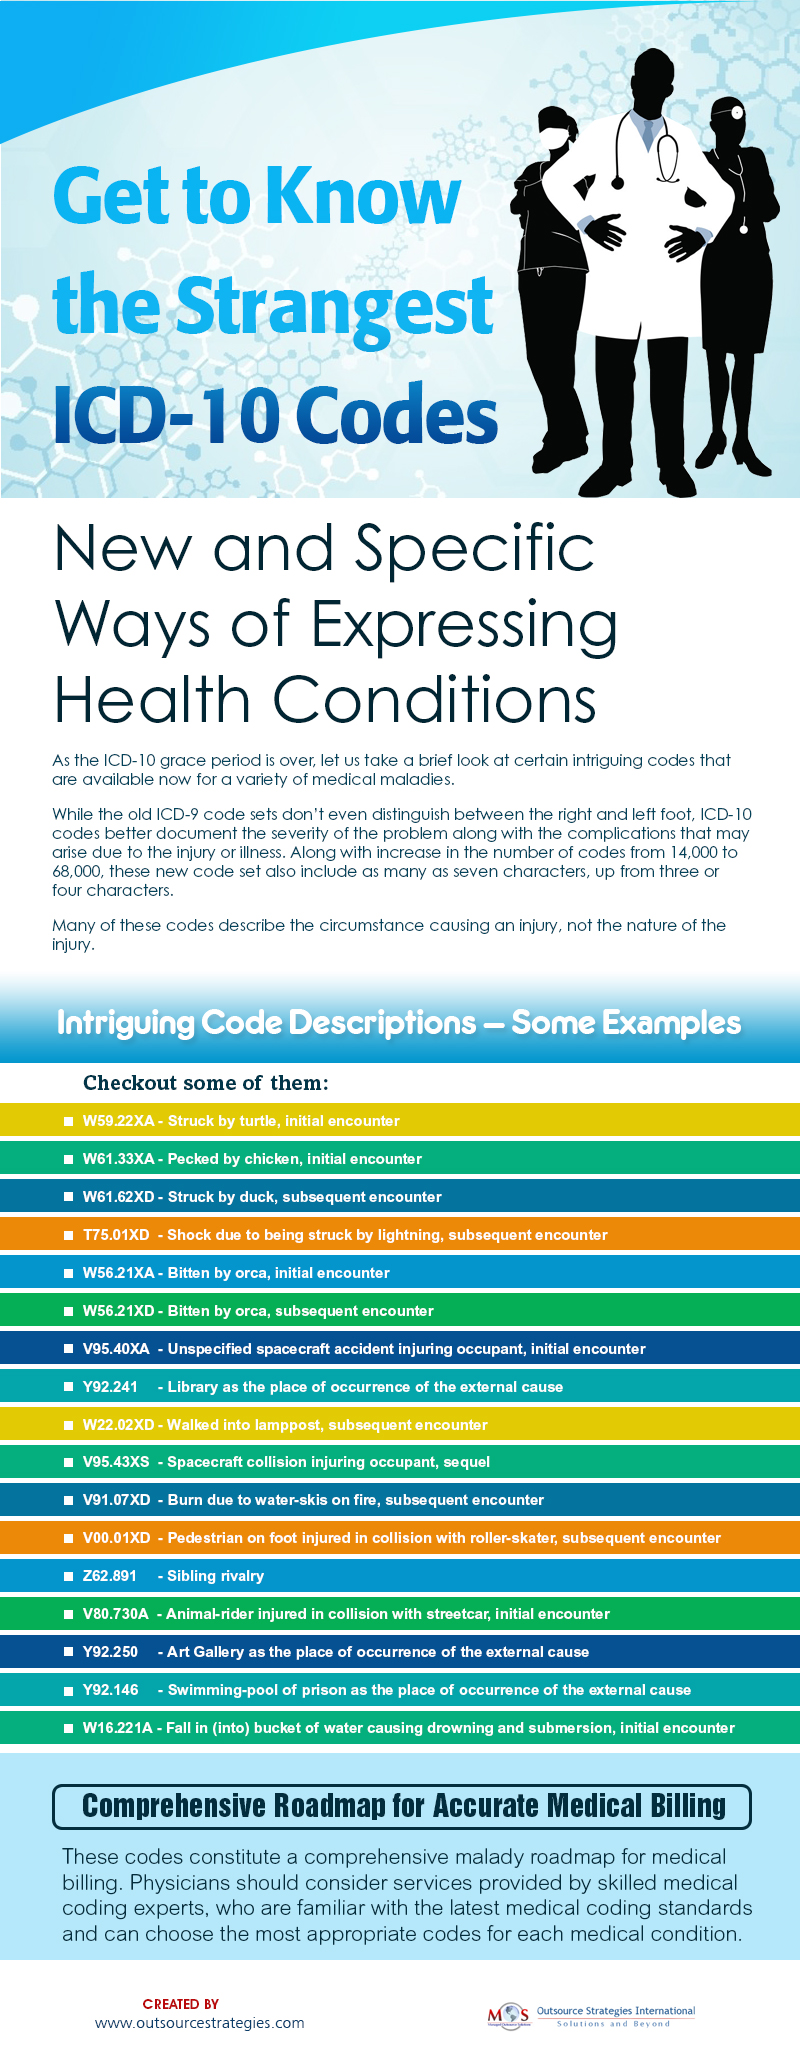 Get to Know the Strangest ICD-10 Codes